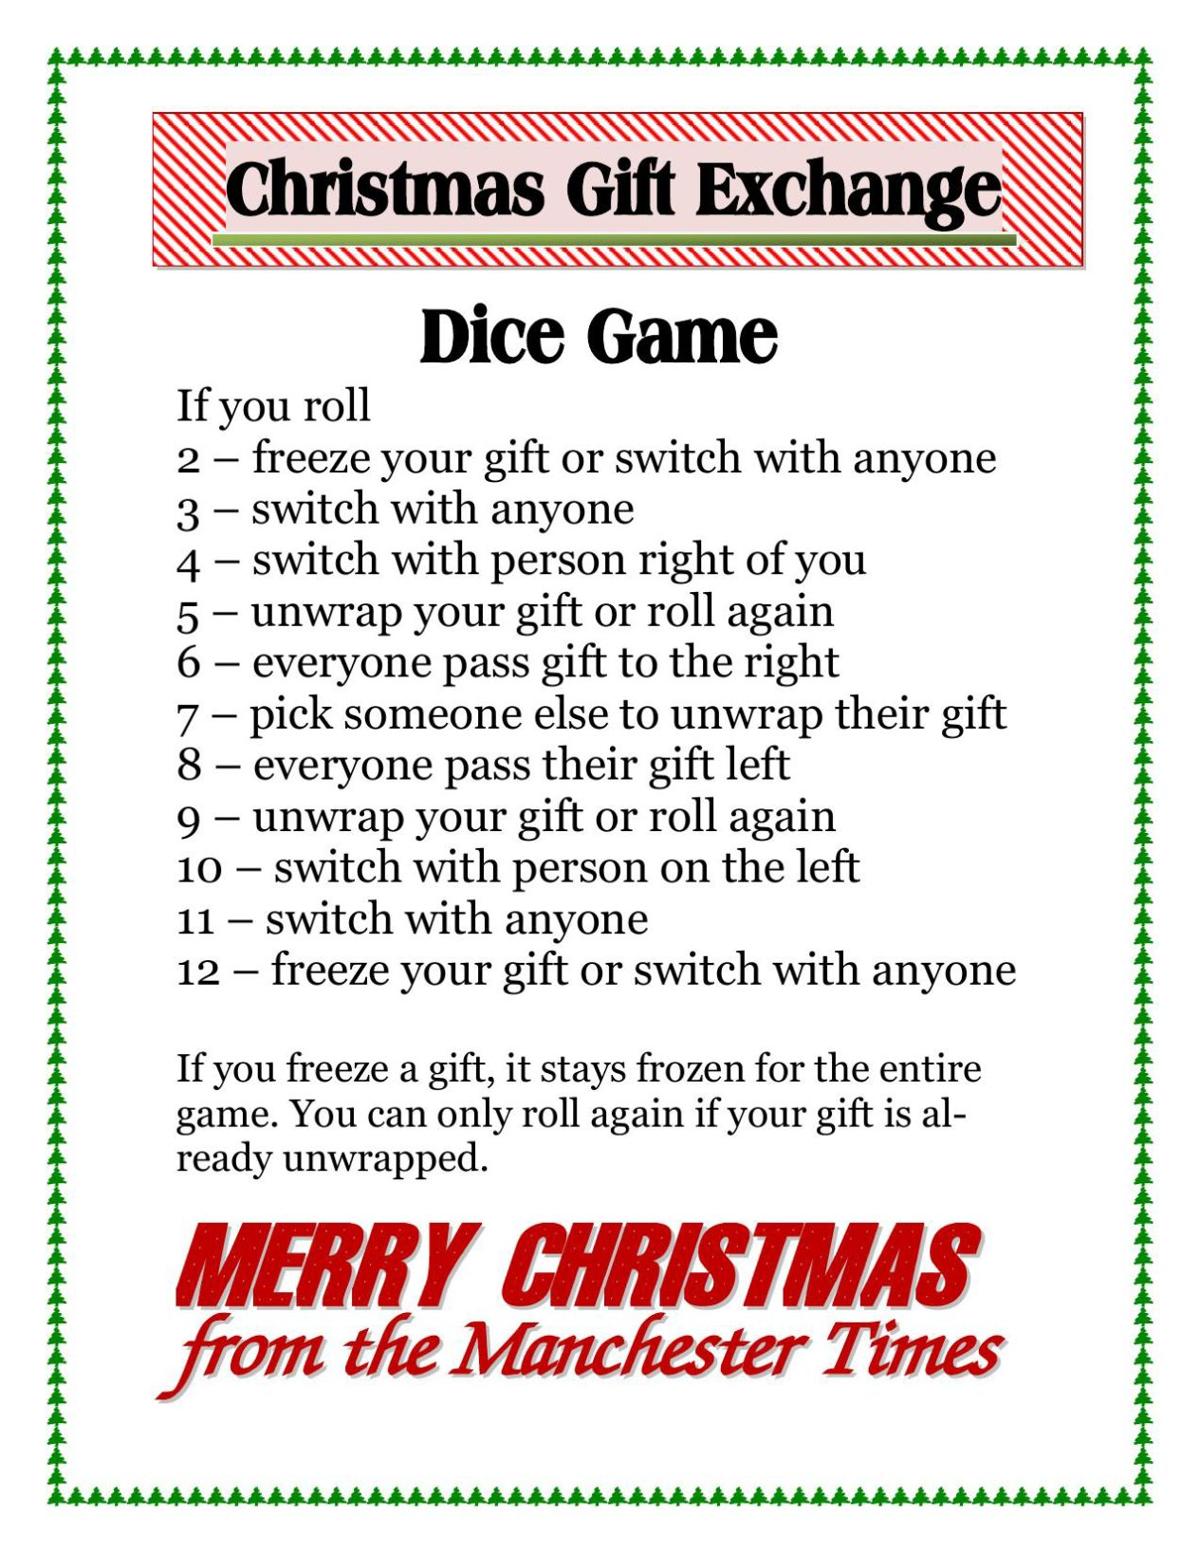 Spice up holiday gift giving with new gift exchange games Education